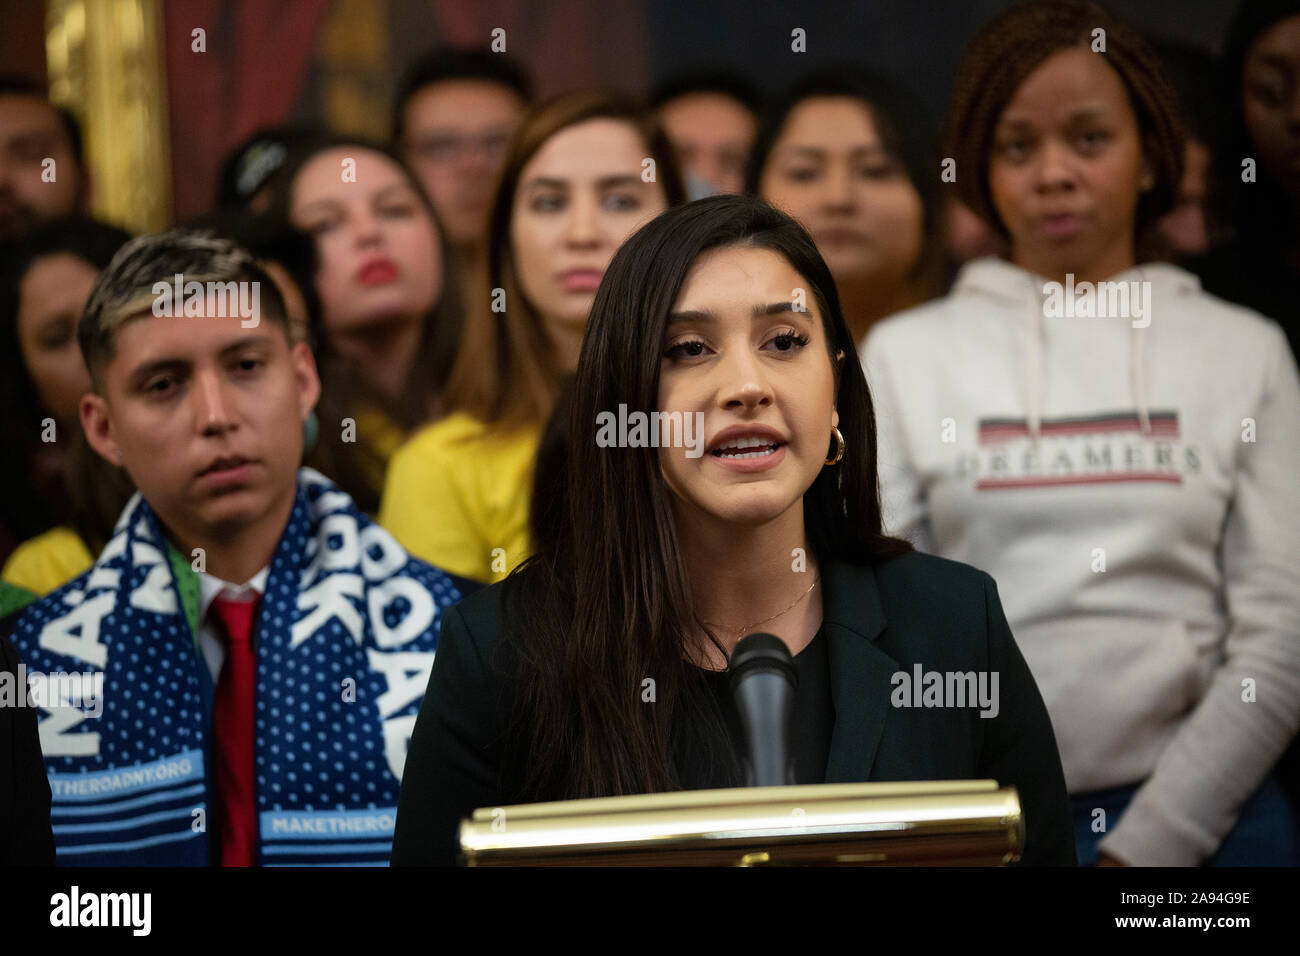 A DACA recipient, joined by Democratic lawmakers, speaks during a press conference on the Deferred Action for Childhood Arrivals program on Capitol Hill in Washington, DC, U.S. on Tuesday, November 12, 2019. The Supreme Court is currently hearing a case that will determine the legality and future of the DACA program. Credit: Stefani Reynolds/CNP | usage worldwide Stock Photo